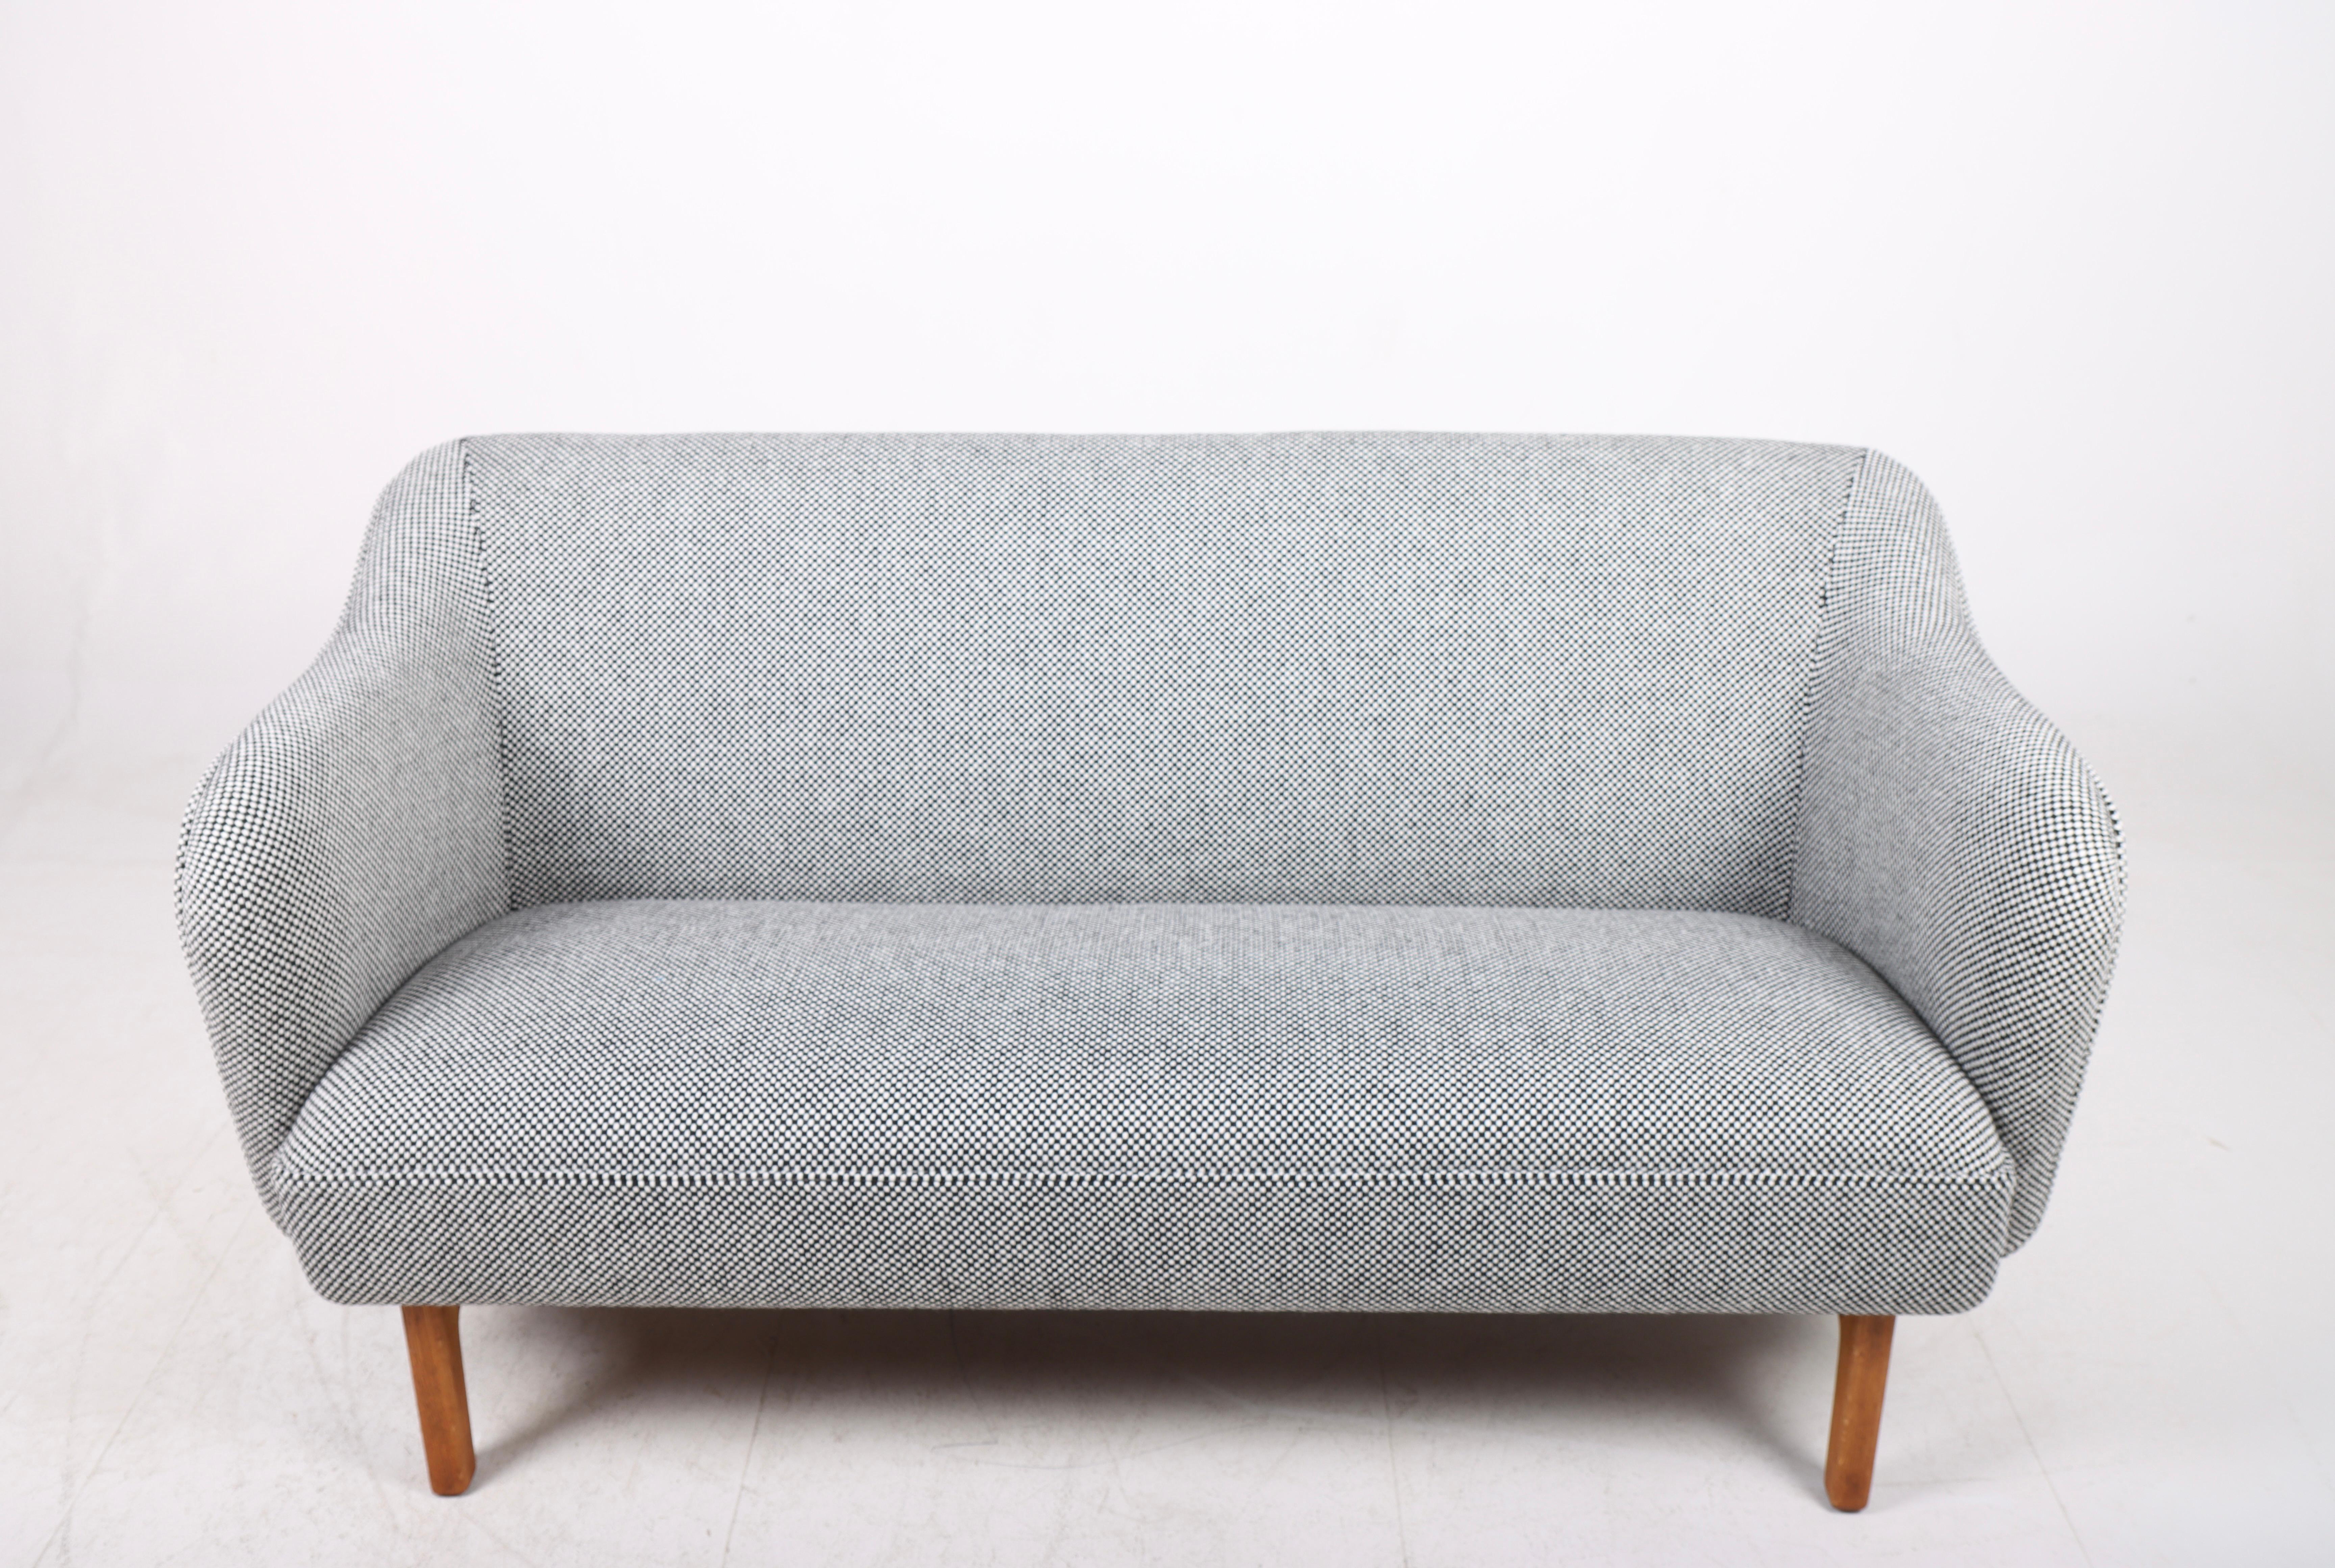 Rare Midcentury Sofa by Tove & Edvard Kindt Larsen, 1950s In Excellent Condition For Sale In Lejre, DK